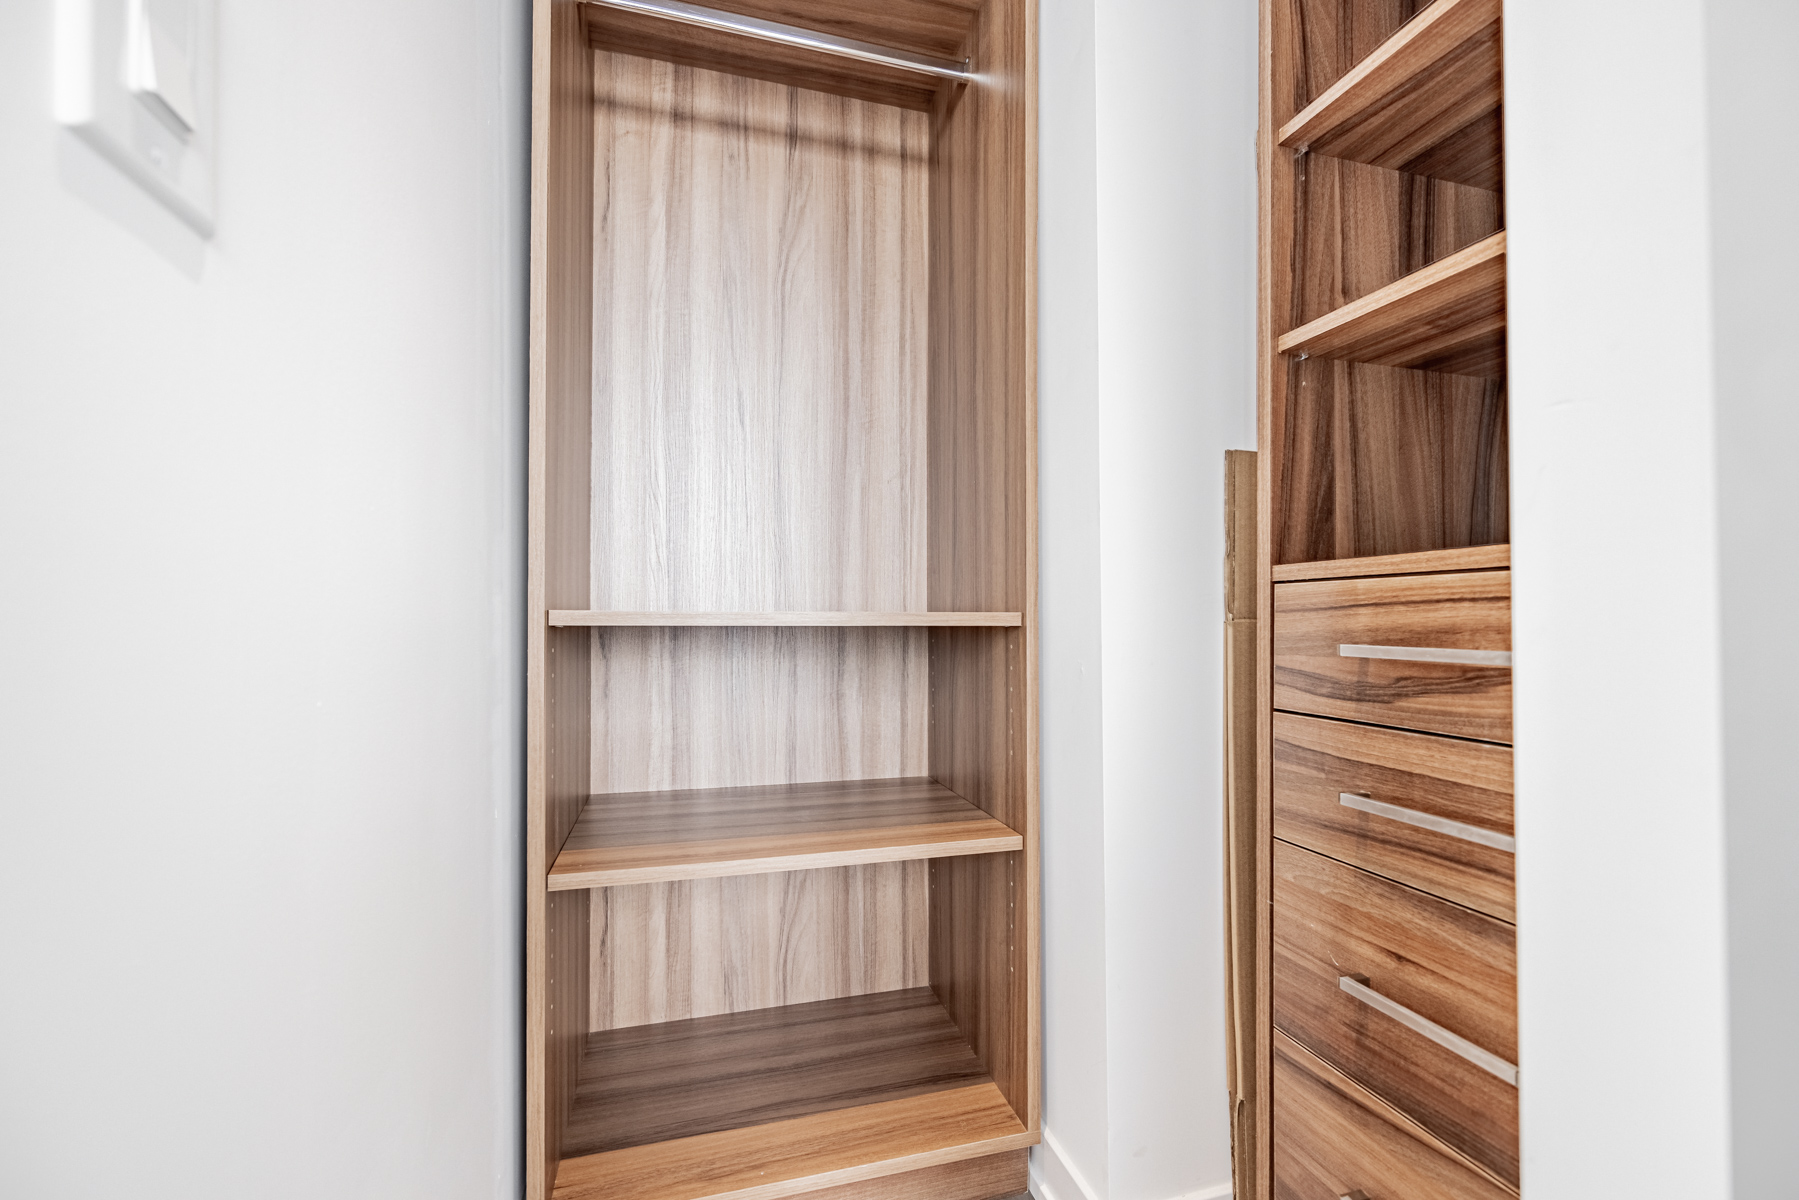 Walk-in closet with built-in shelves.